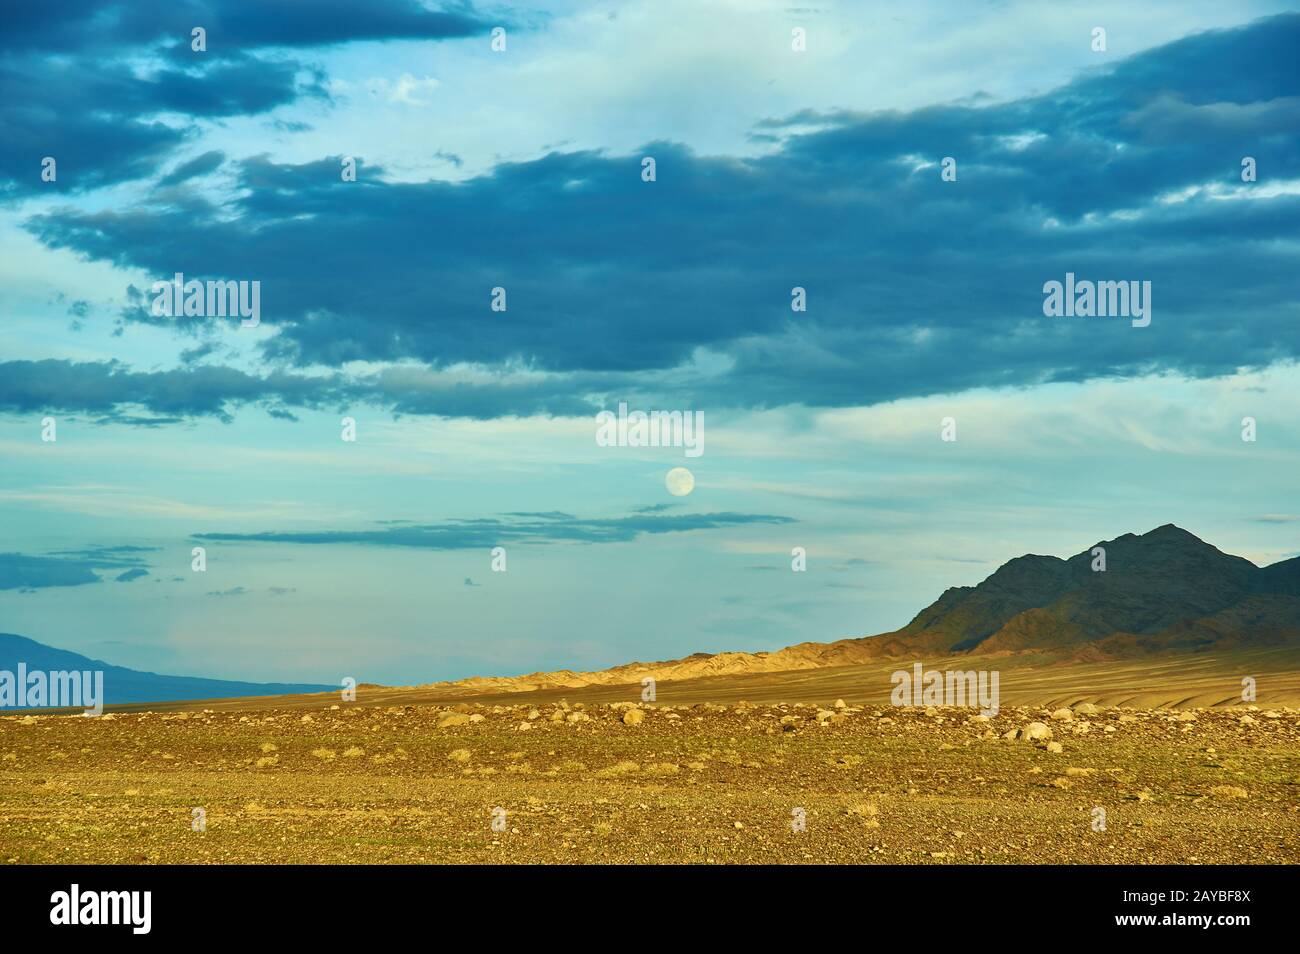 Khovd Province in western Mongolia. Stock Photo